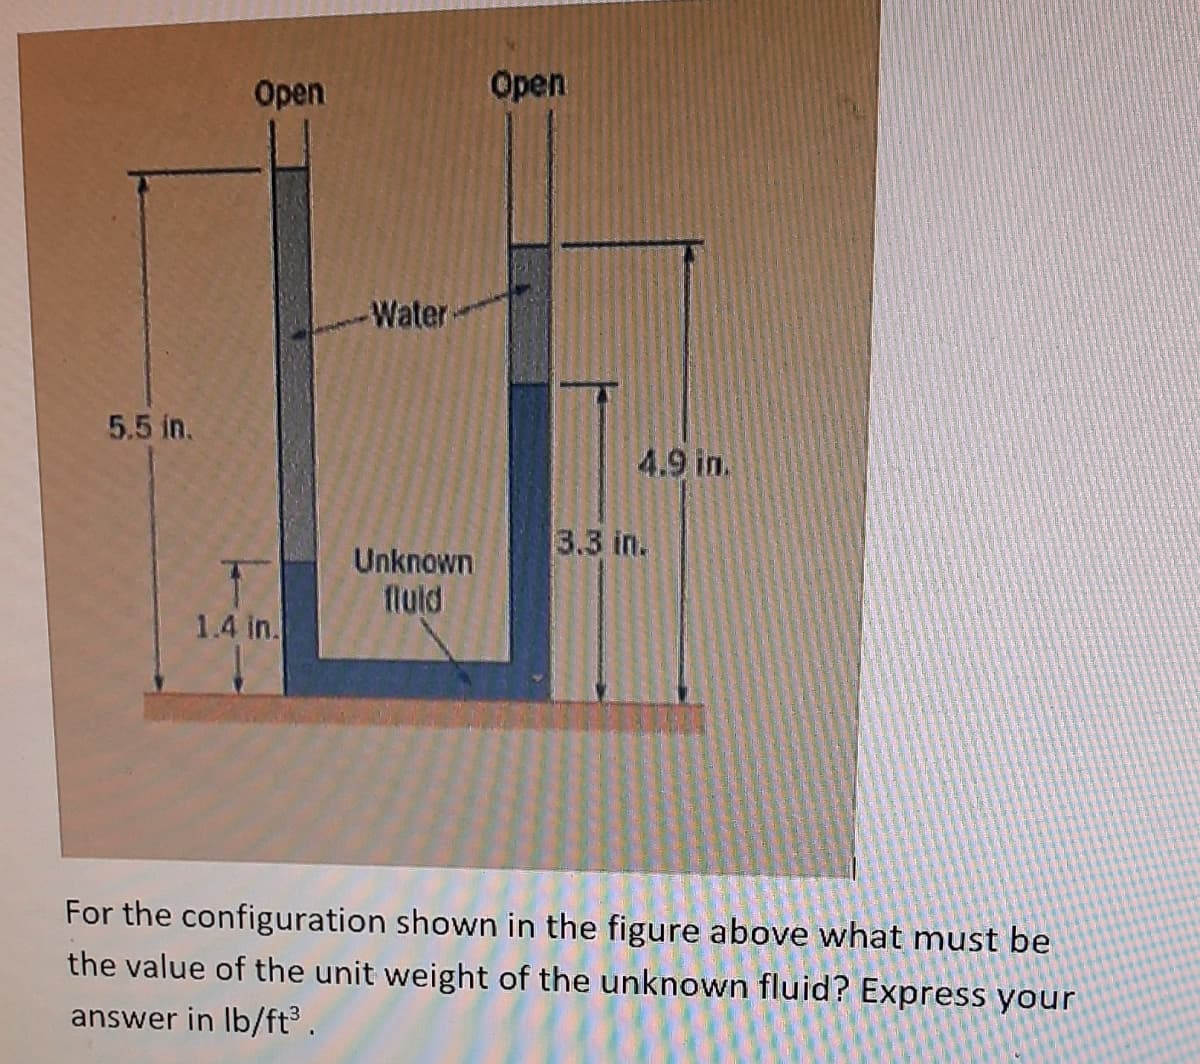 Open
Open
Water
5.5 in.
4.9 in
3.3 in.
Unknown
fluld
1.4 in.
For the configuration shown in the figure above what must be
the value of the unit weight of the unknown fluid? Express your
answer in Ib/ft3.
